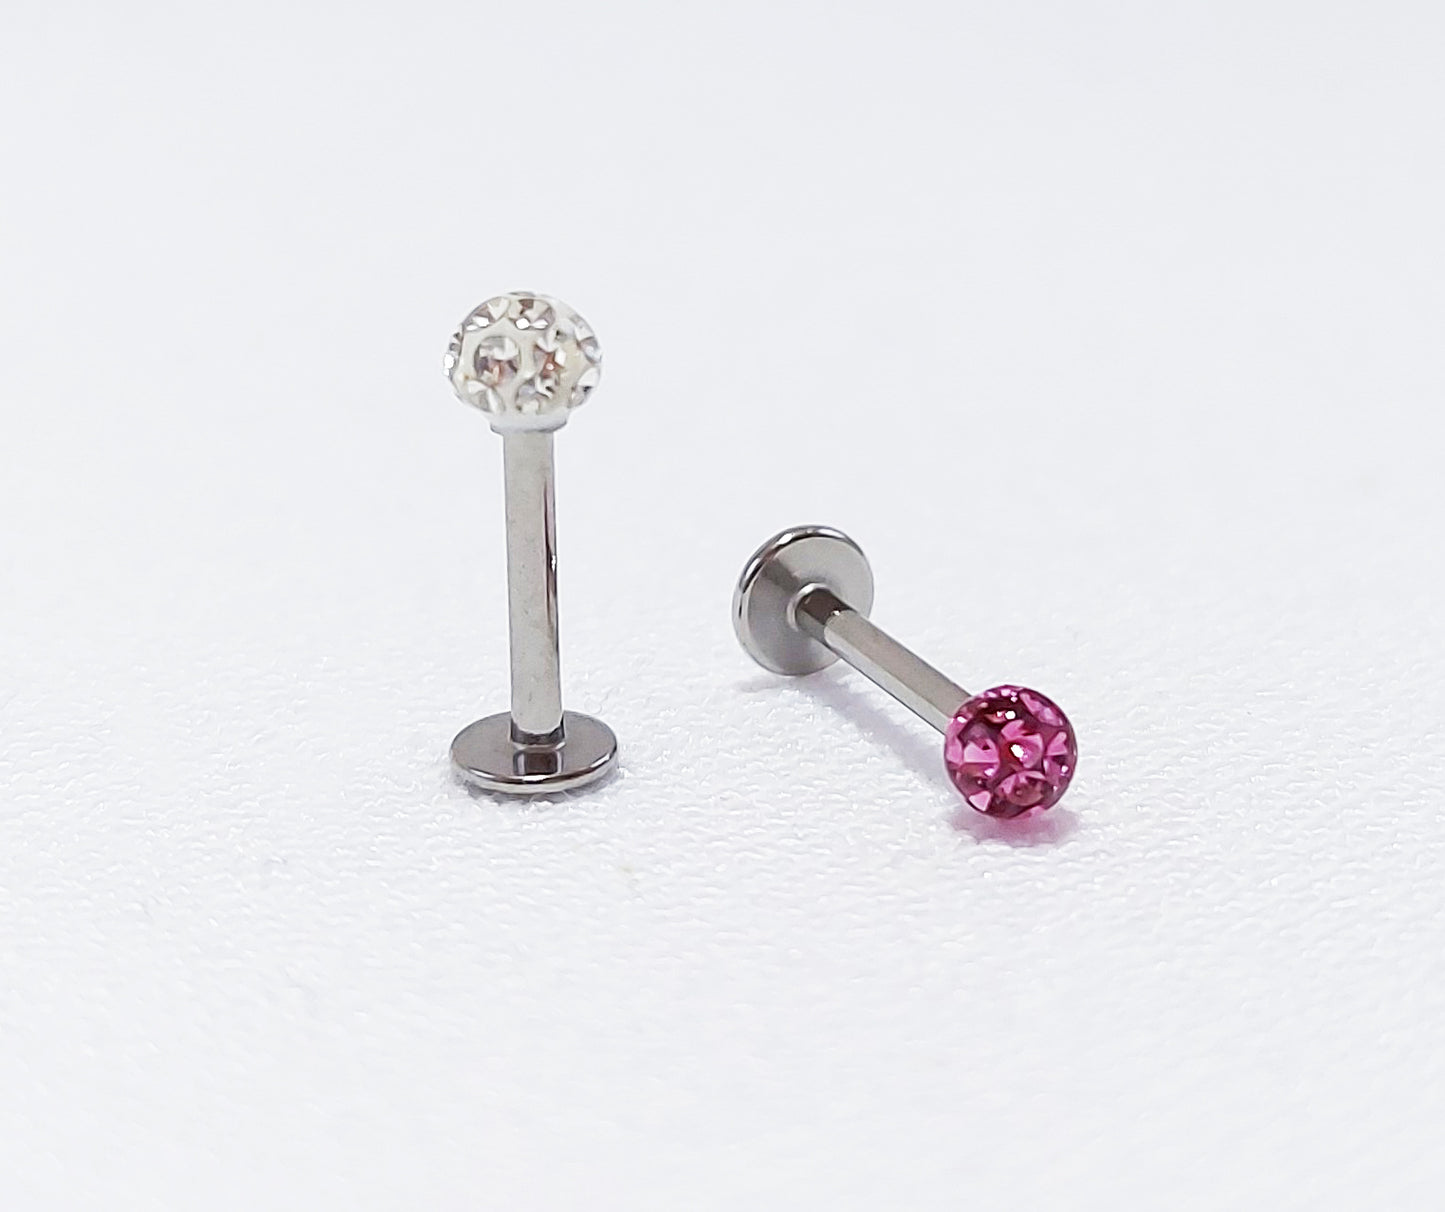 Surgical Steel Labret with Cubic Zirconia Stones